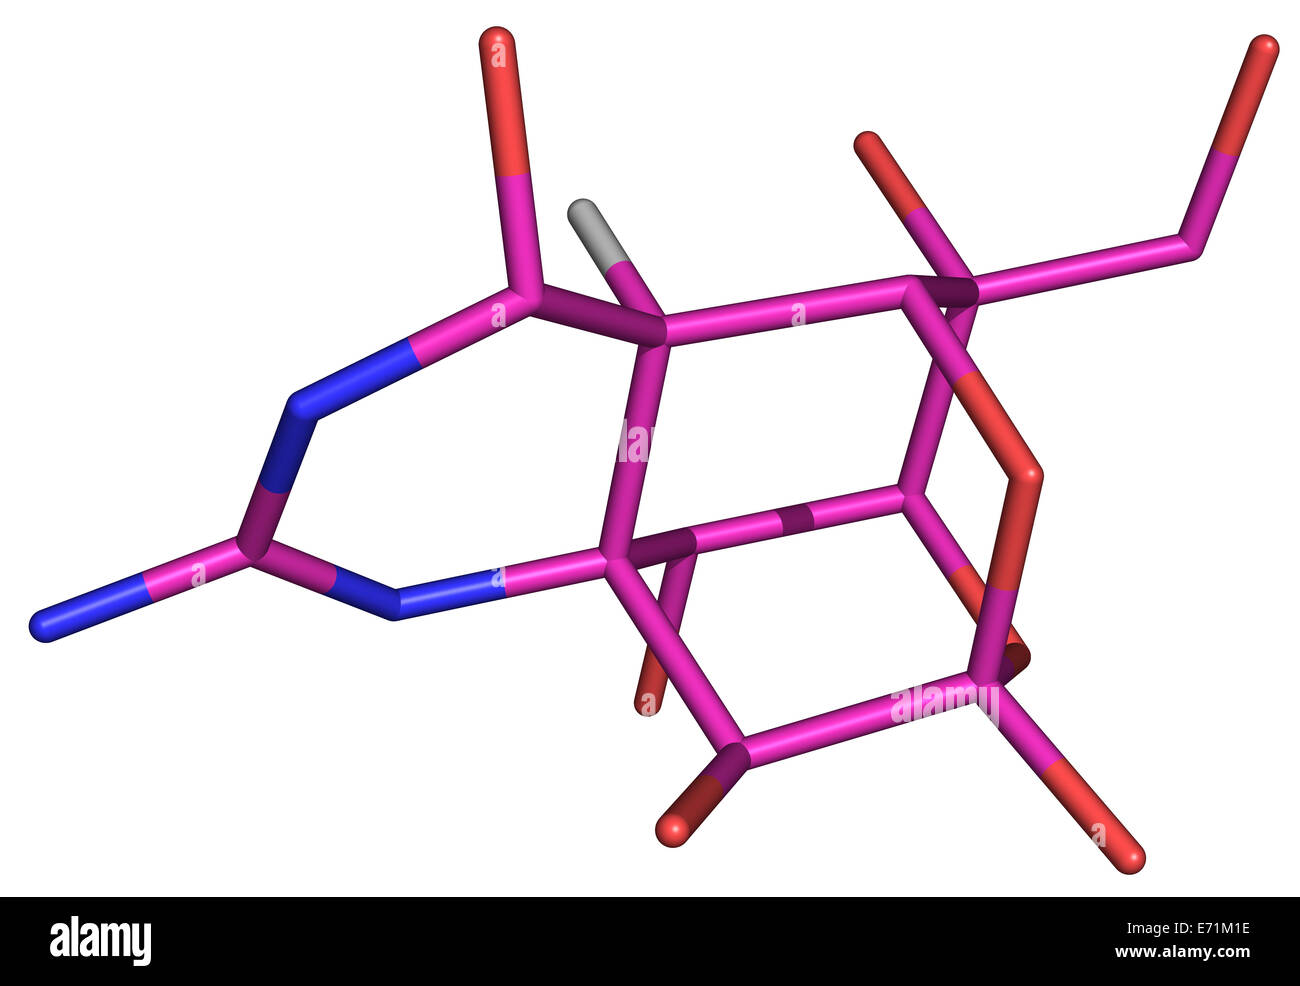 Tetrodotoxin, frequently abbreviated as TTX, is a potent neurotoxin. Stock Photo